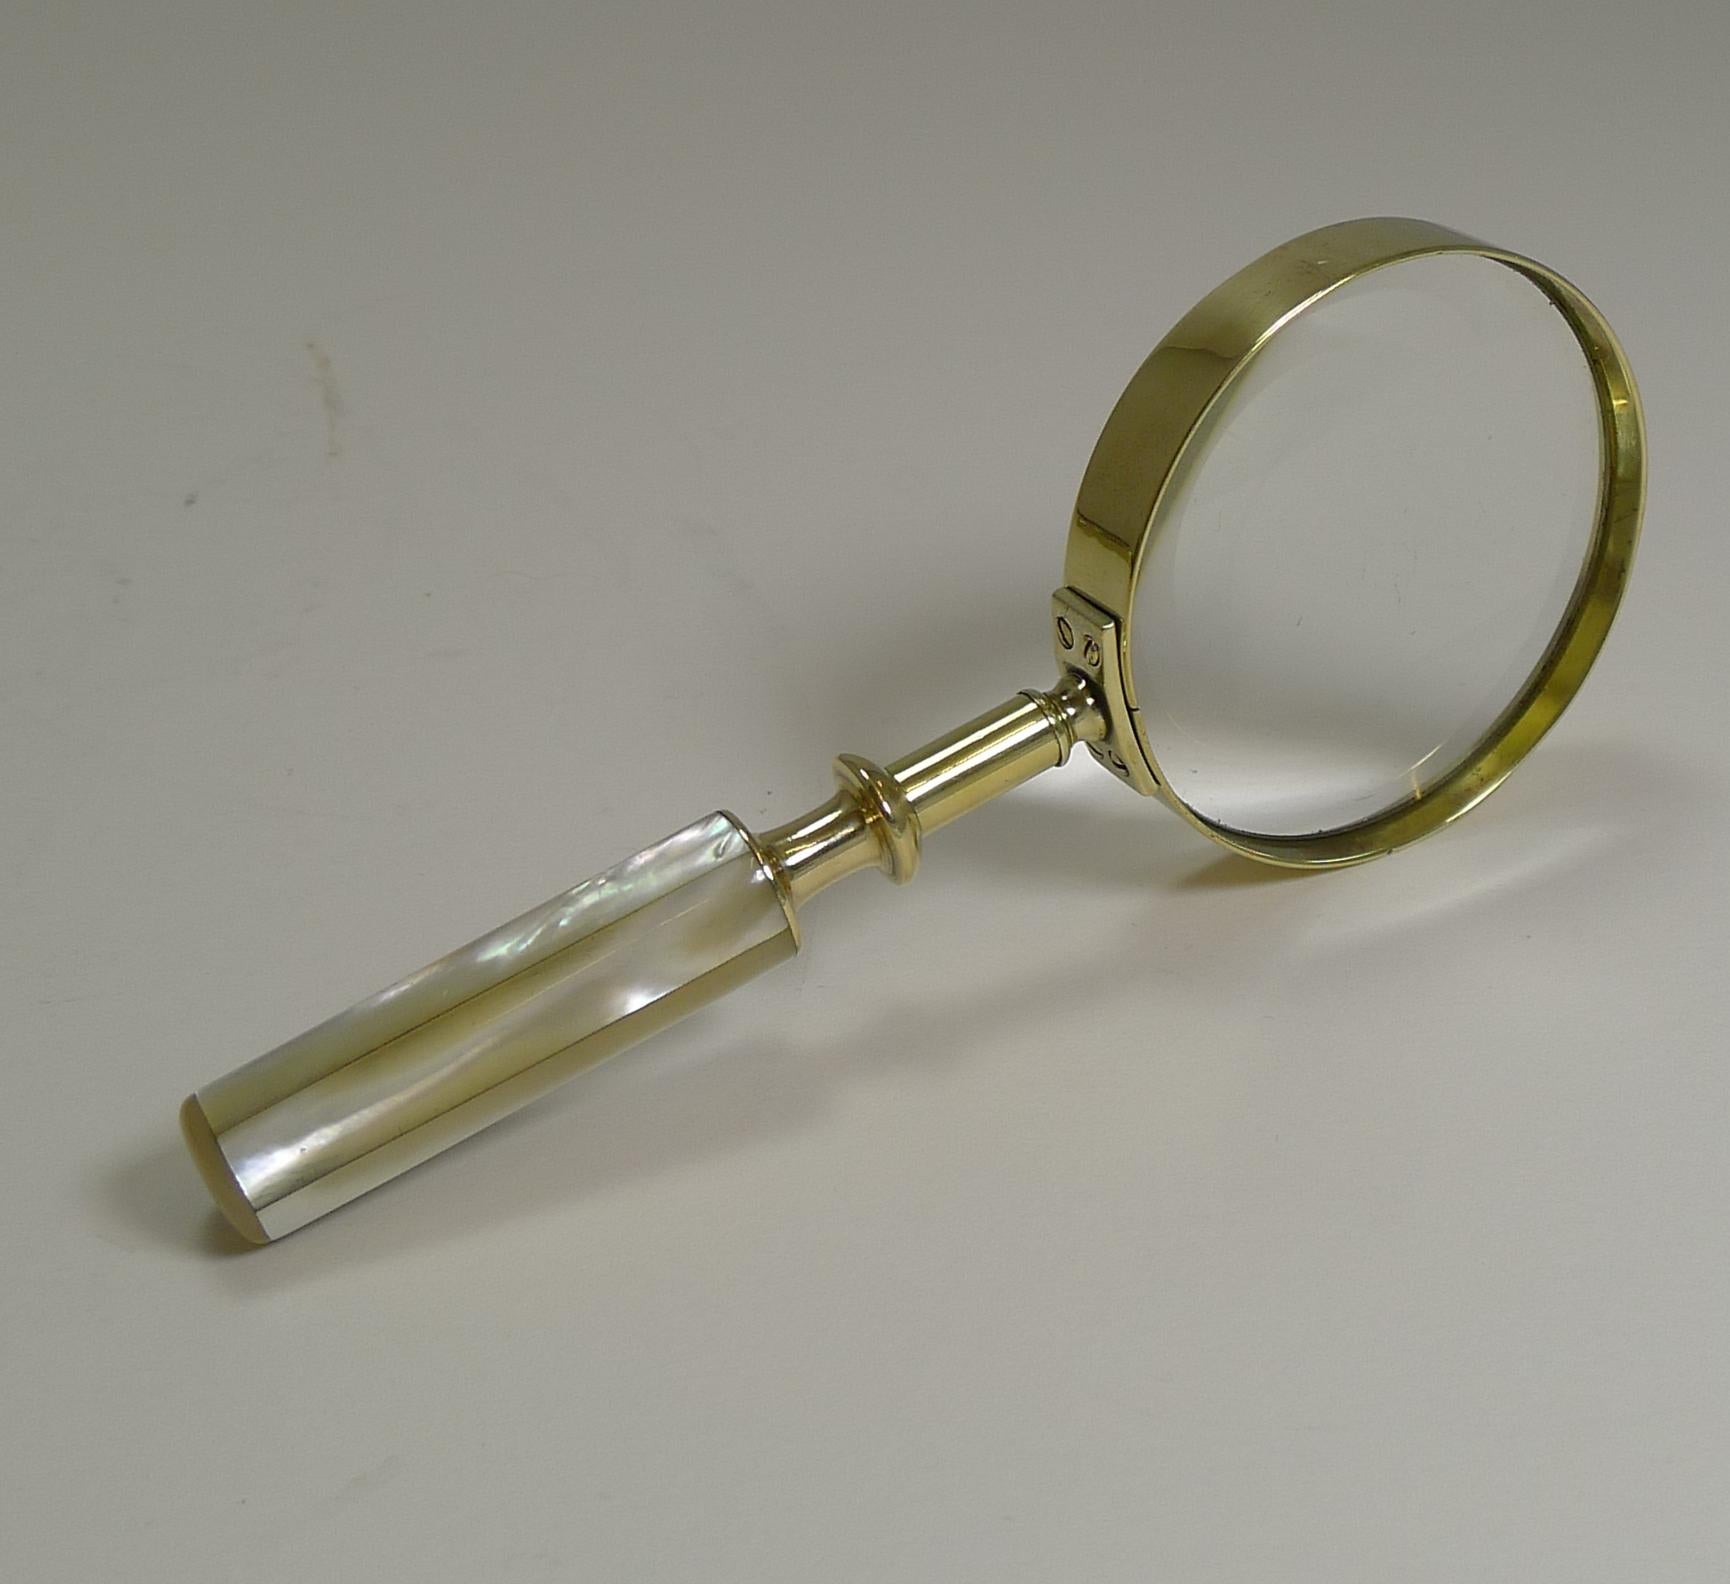 A fabulous and very usable late Victorian magnifying glass made from solid English brass with a quality screwed construction and the handle decorated with Mother of Pearl or Nacre shell with it's iridescent qualities.

Excellent condition with a